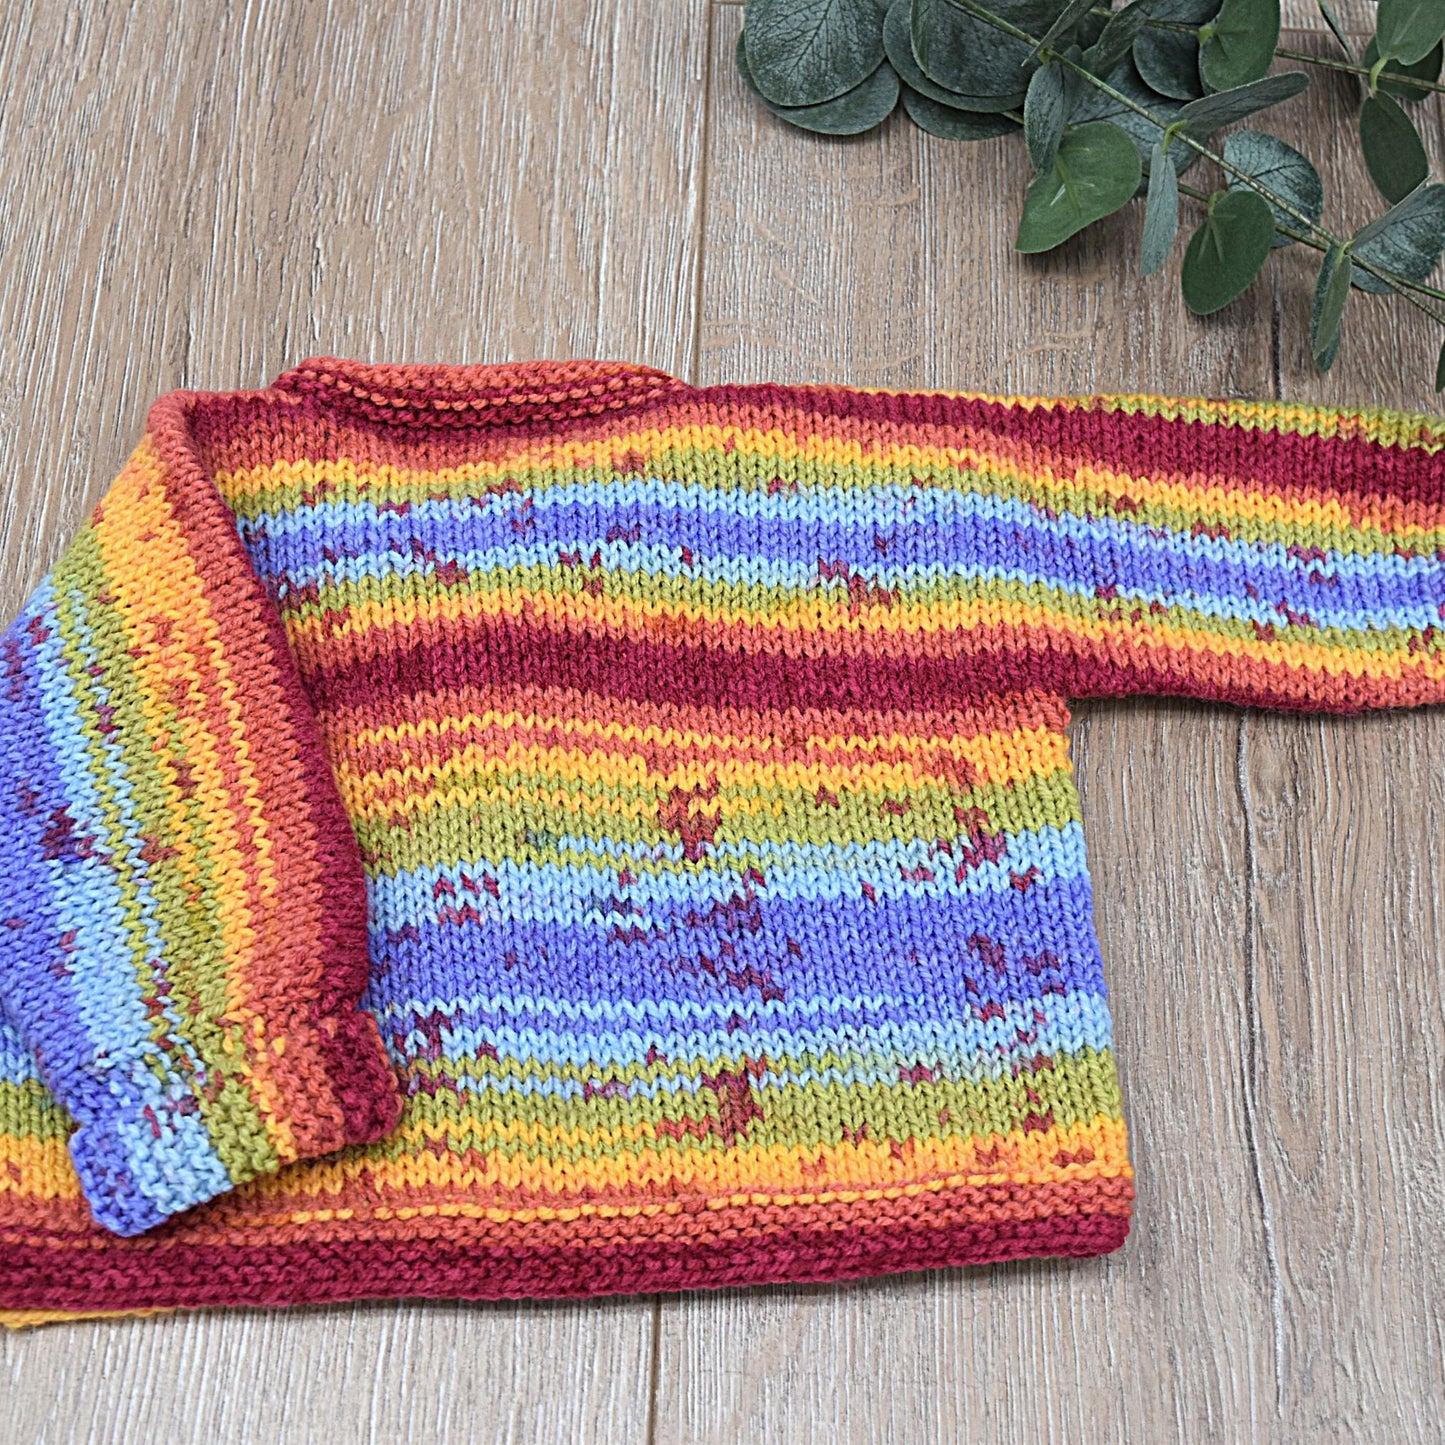 Traditional Baby Blankets | Handmade Baby Blankets